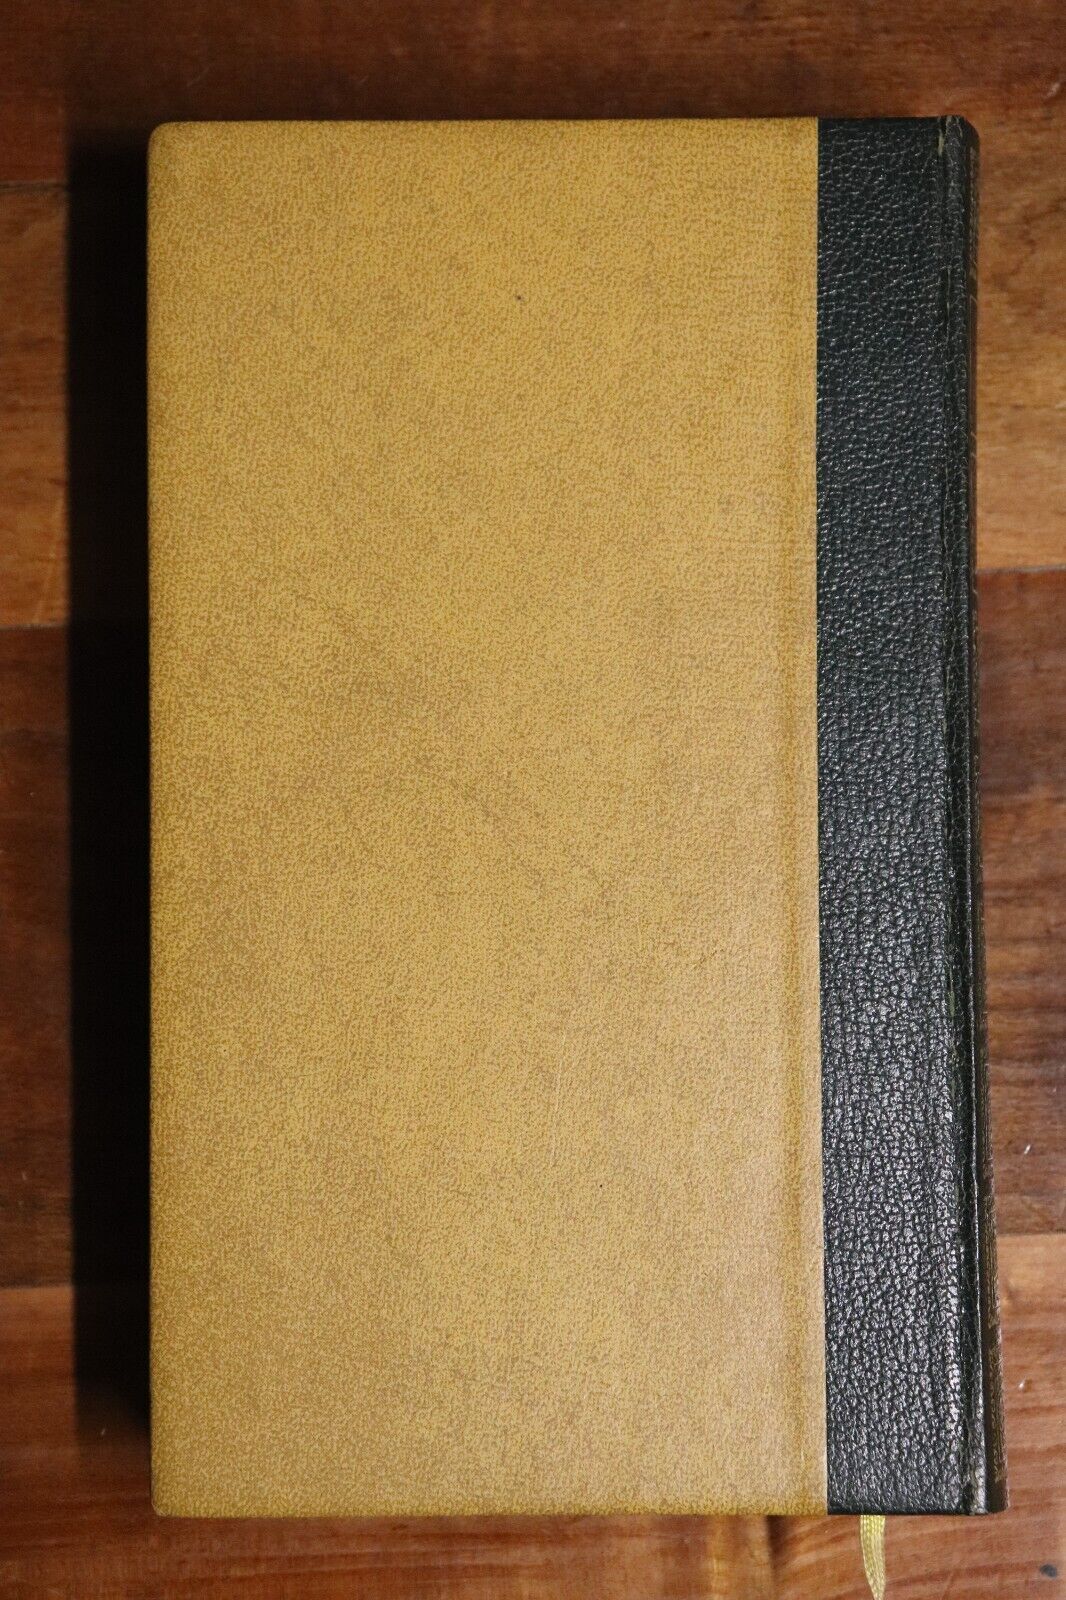 The Voyage Of The Beagle - 1968 - Vintage Charles Darwin Book